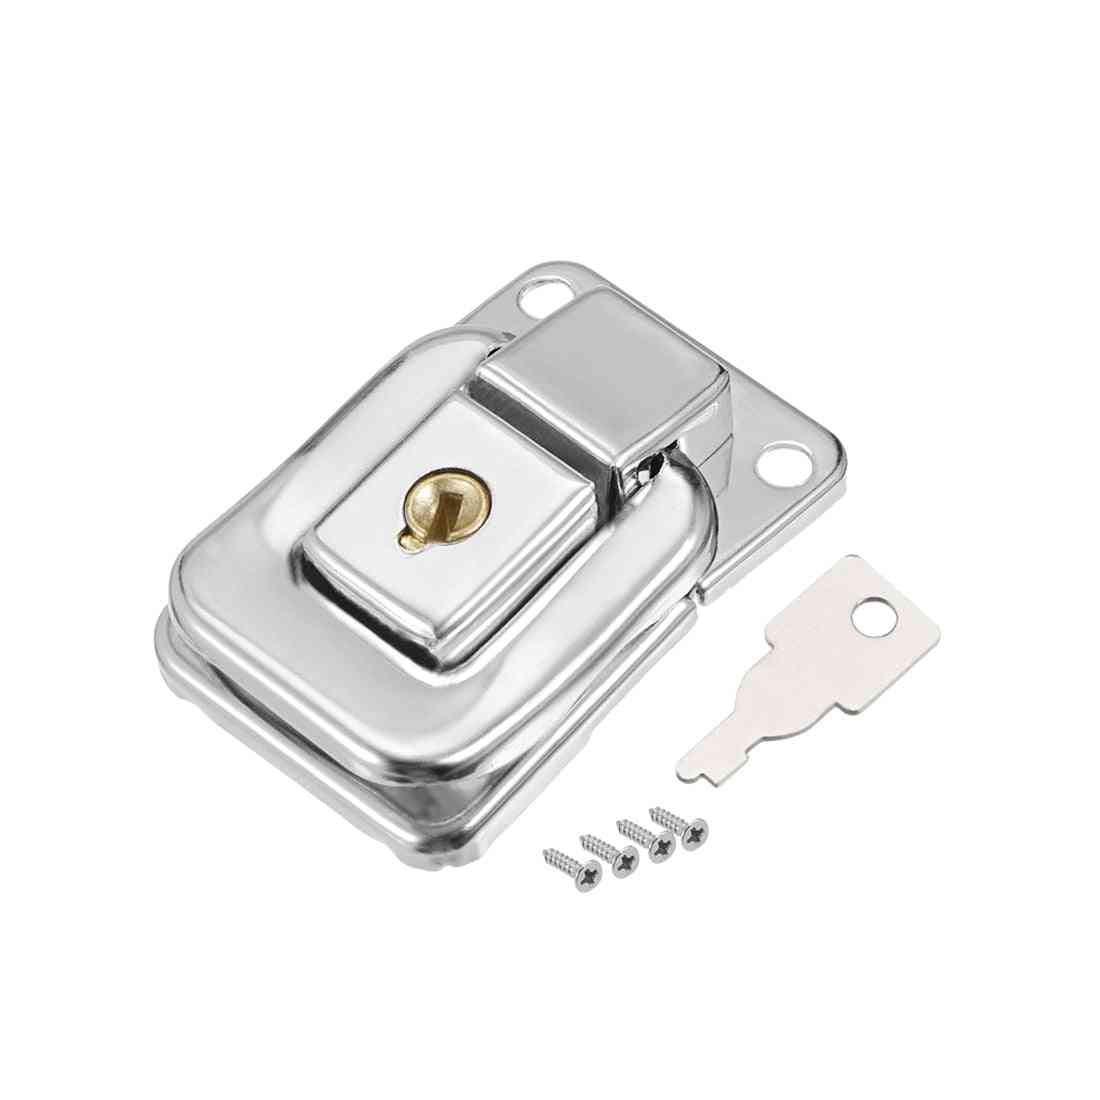 Small Size Suitcase Hasp, Metal Catch Latch With Keys And Screws